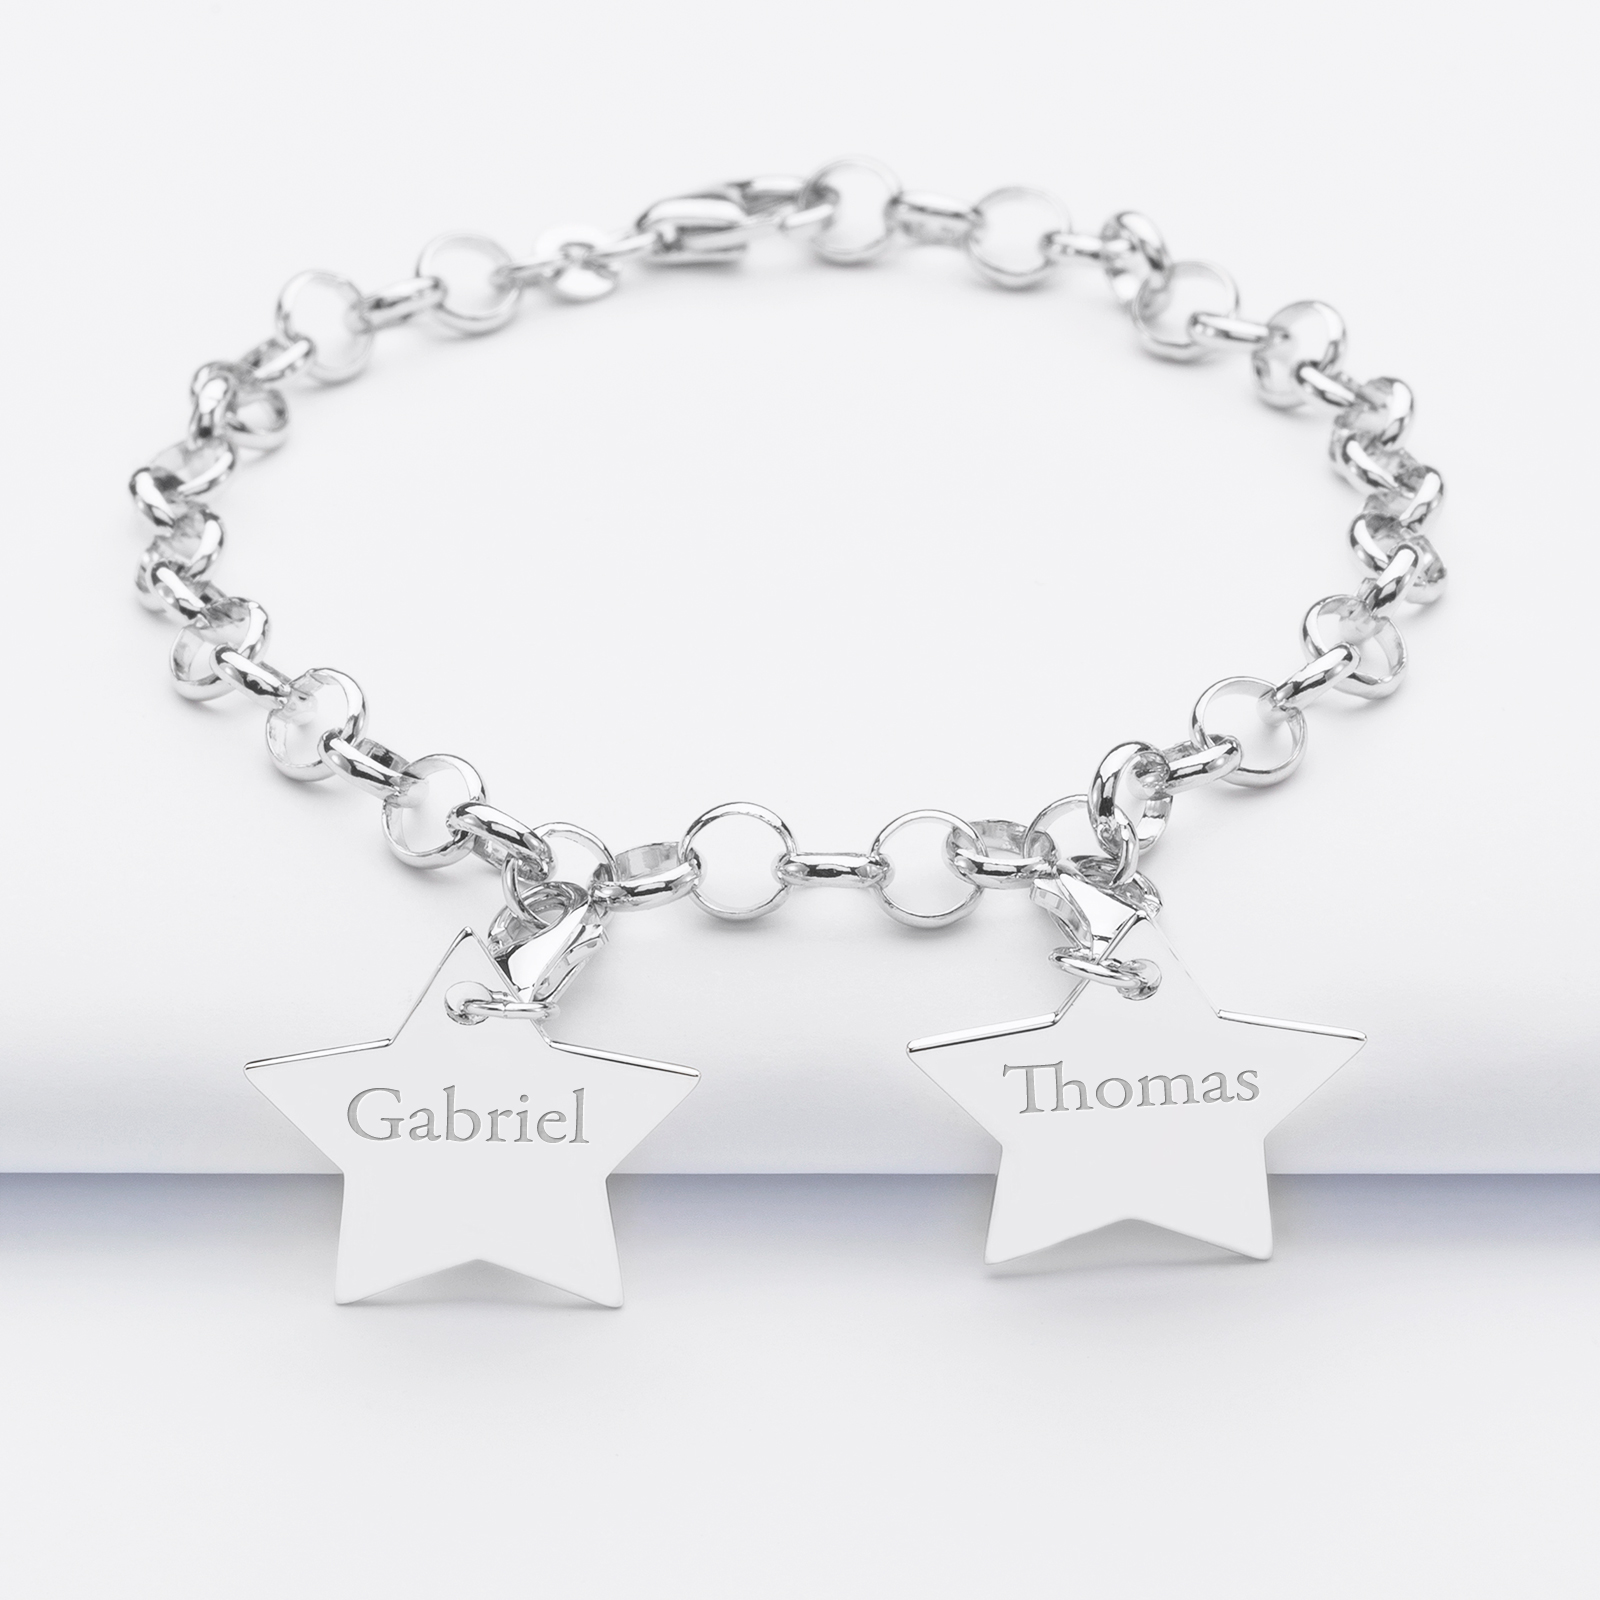 Personalised bracelet with 2 engraved silver star charms 20x20 mm - names